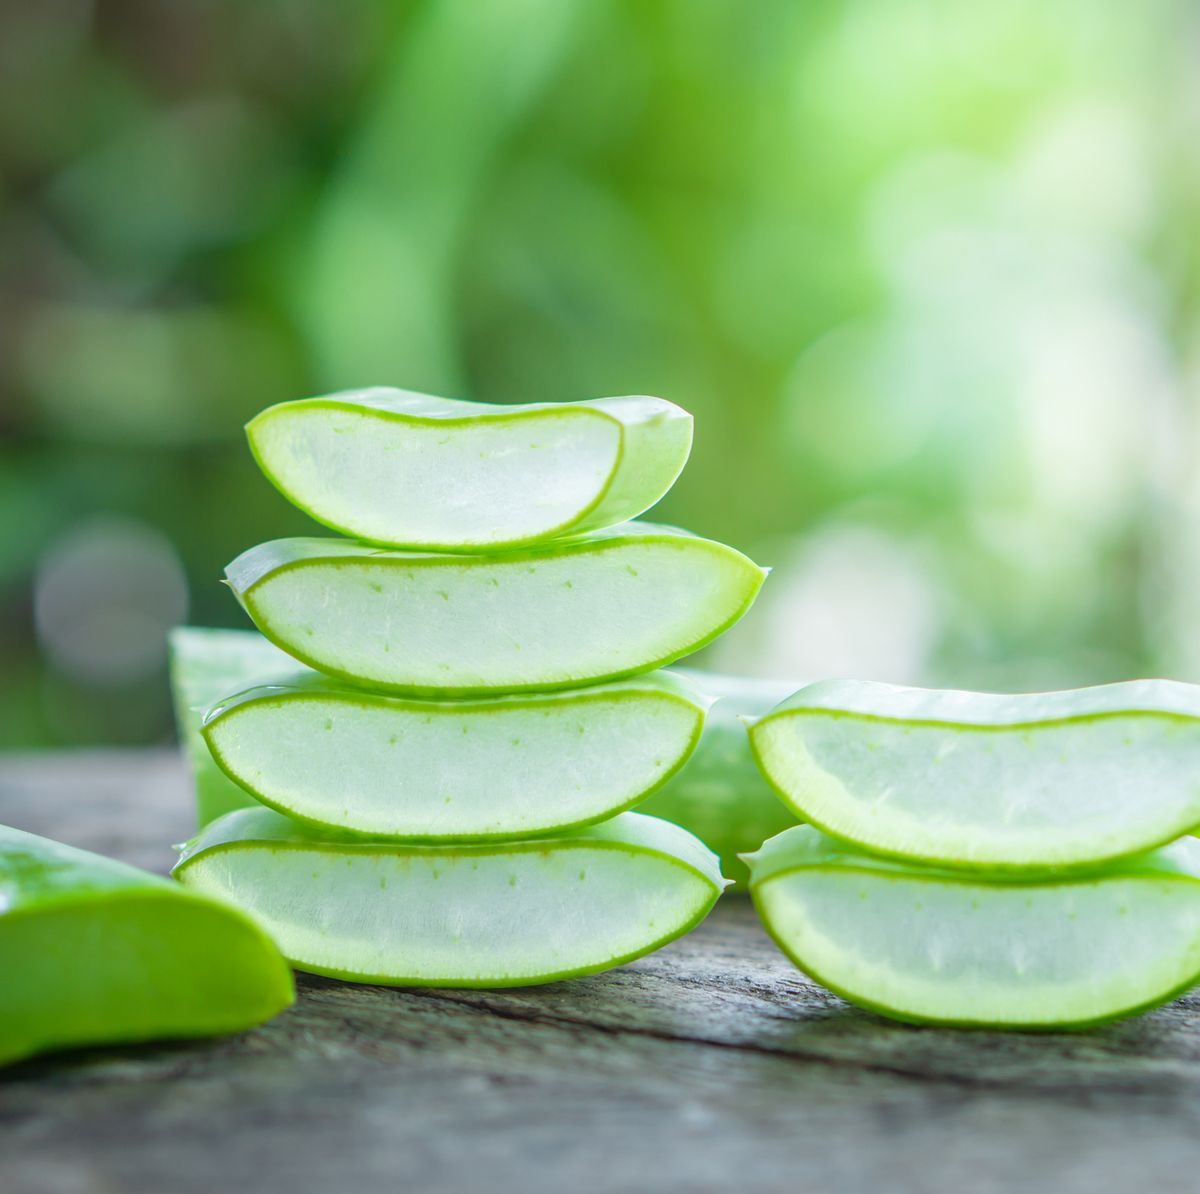 8 Benefits of Aloe Vera for Skin, According to Dermatologists